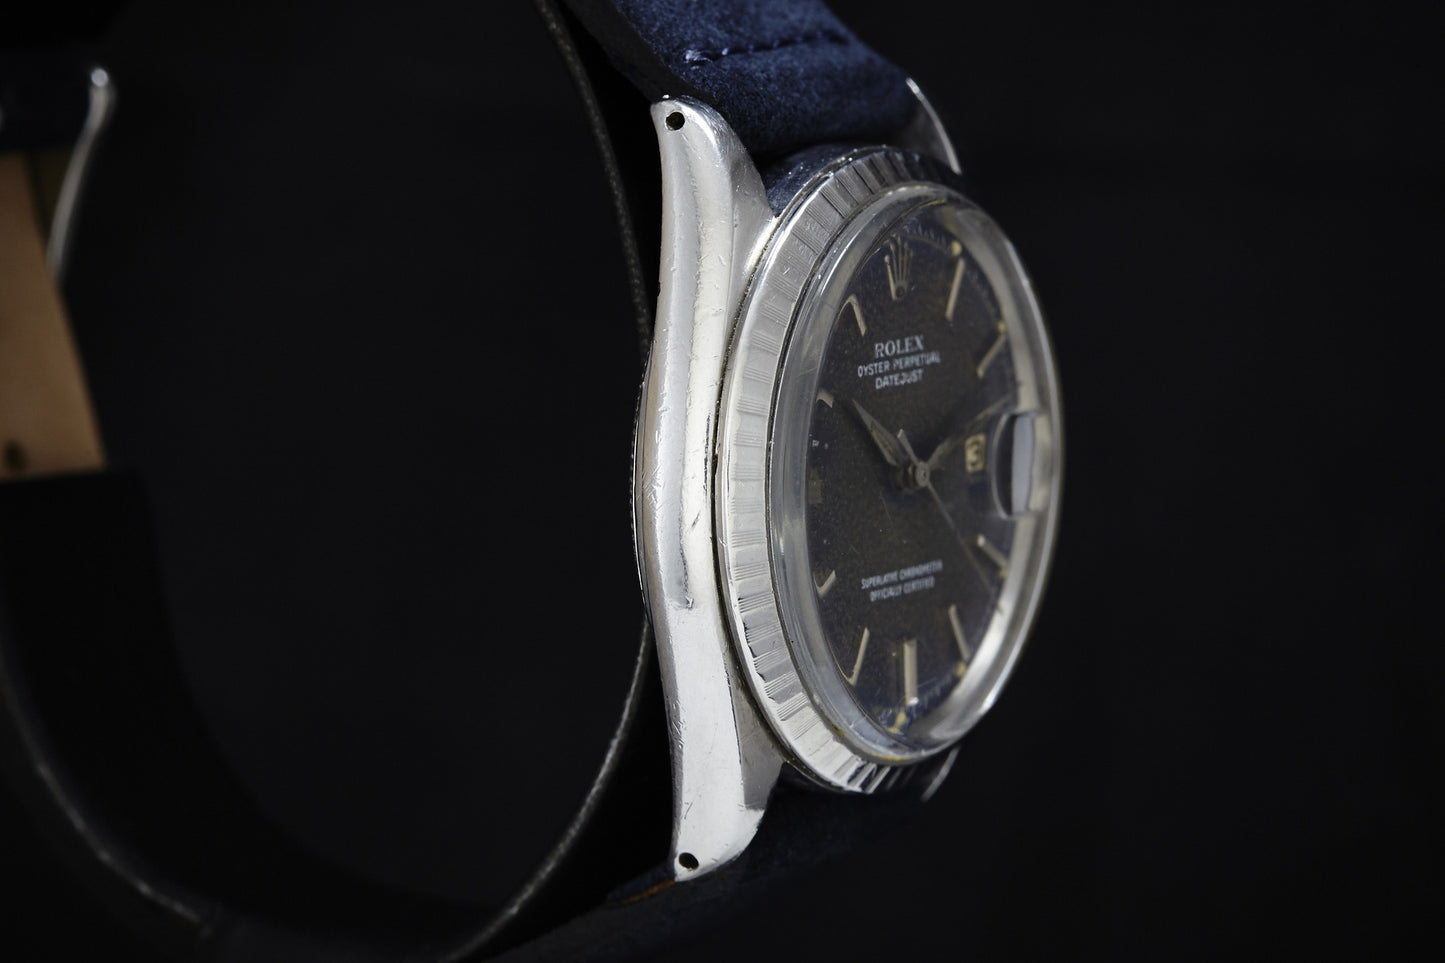 Rolex Datejust 1603 Blue Patinated Dial - 1967